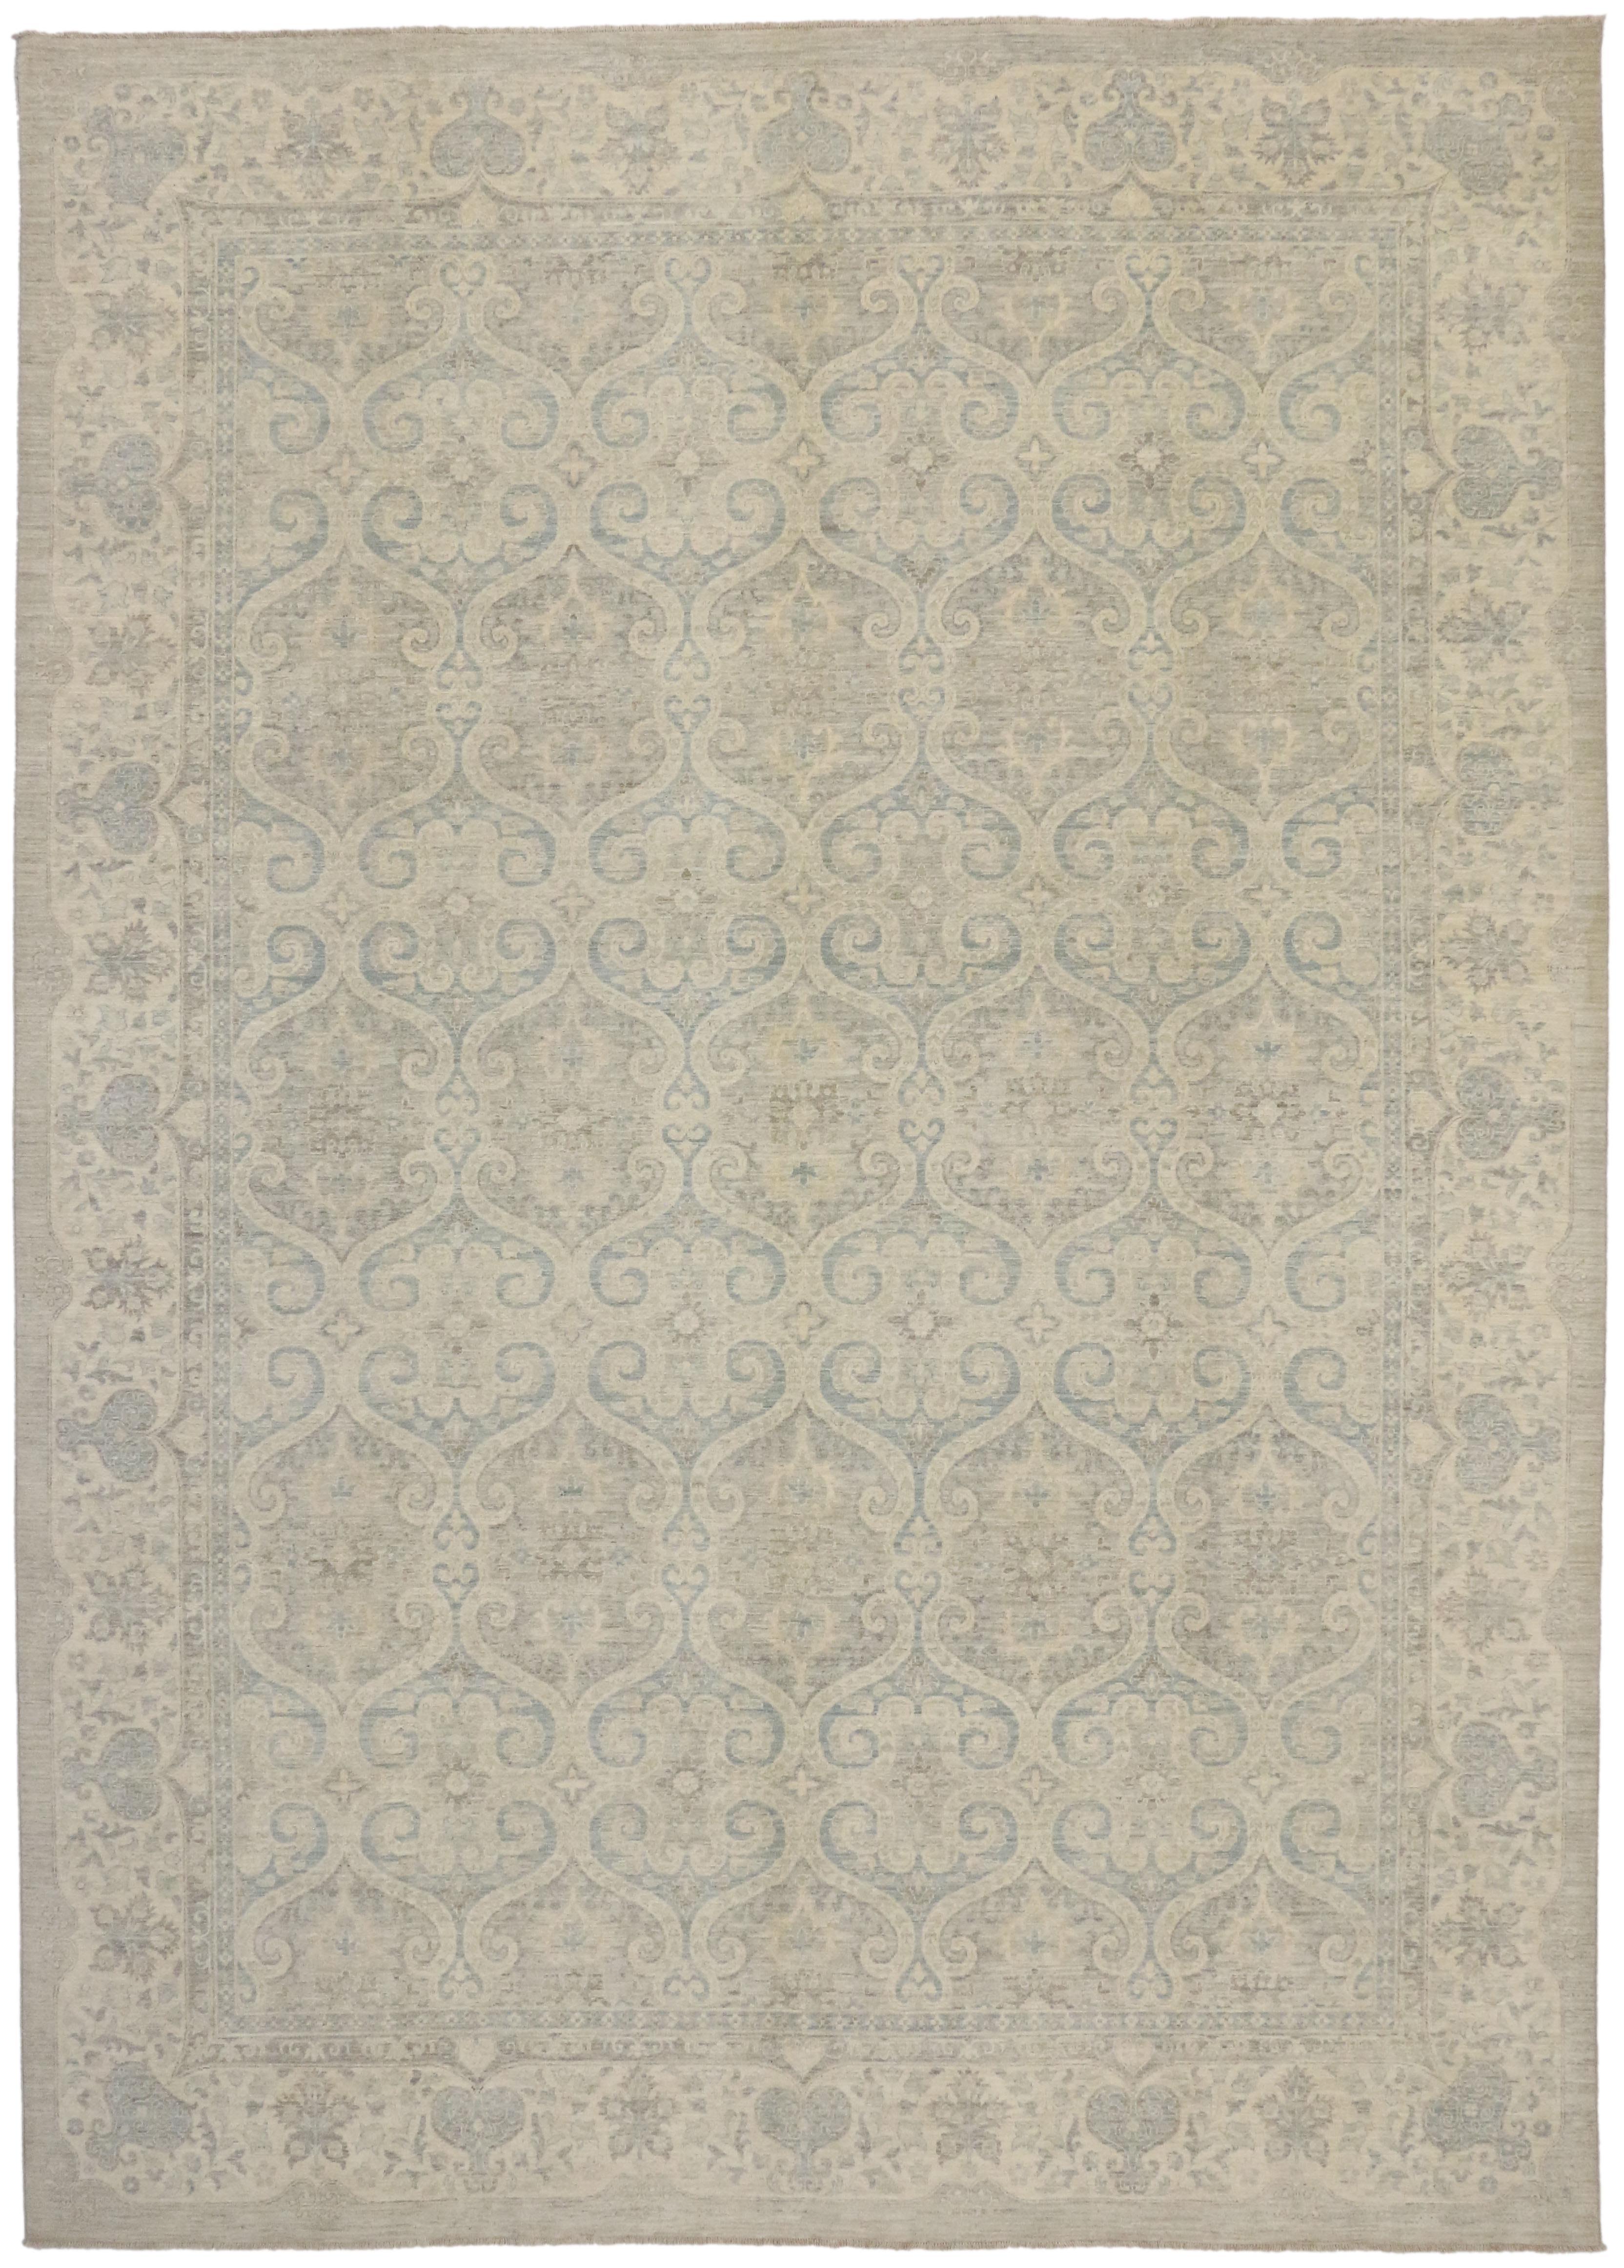 80179 New Transitional Area Rug with French Cottage Style in Neutral Coastal Colors. Blending a French Cottage style with elements from the modern world, this hand knotted wool transitional area rug beautifully balances new and old. Softer yet no